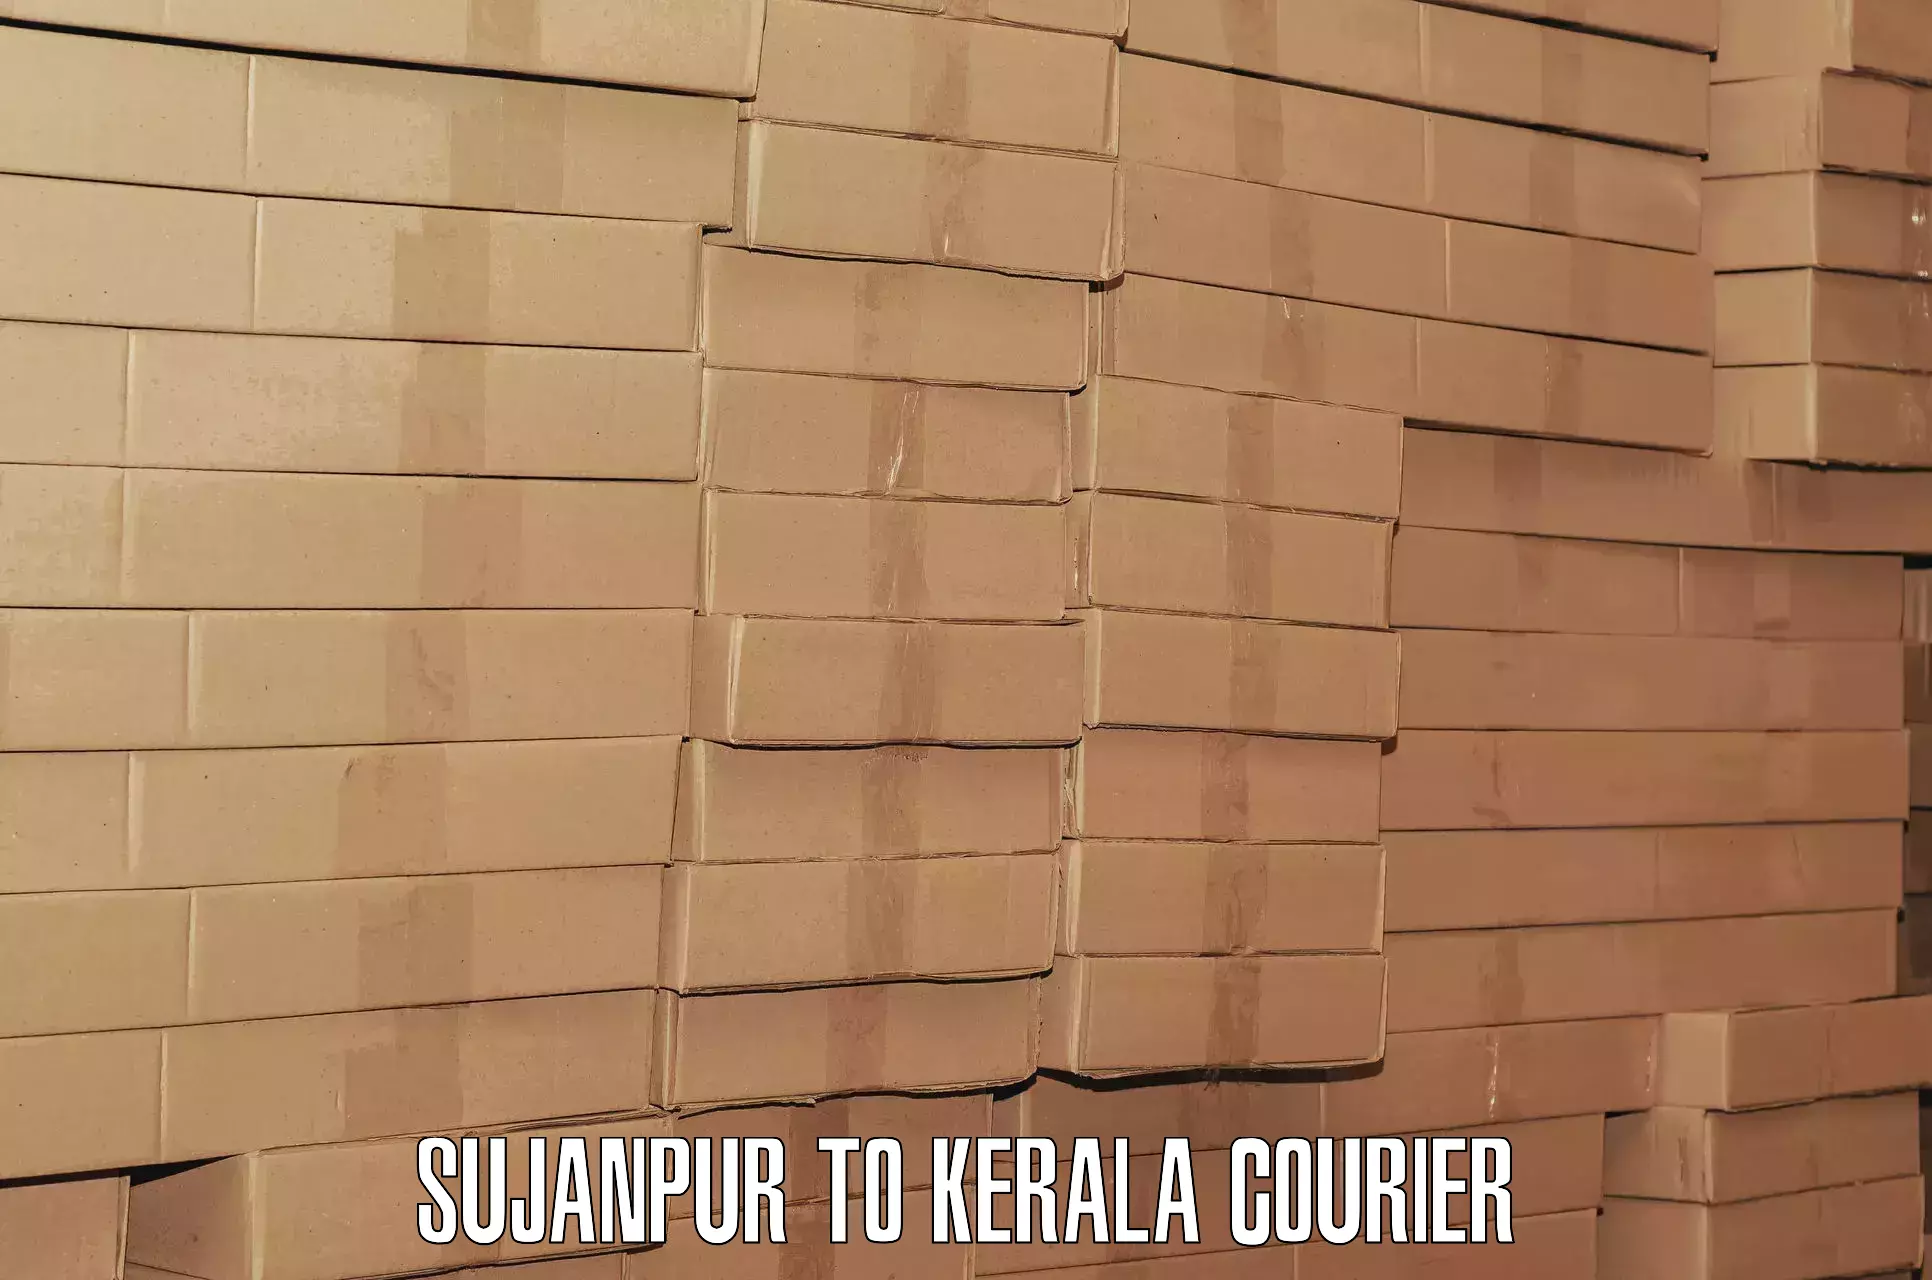 Luggage shipment specialists Sujanpur to Kerala